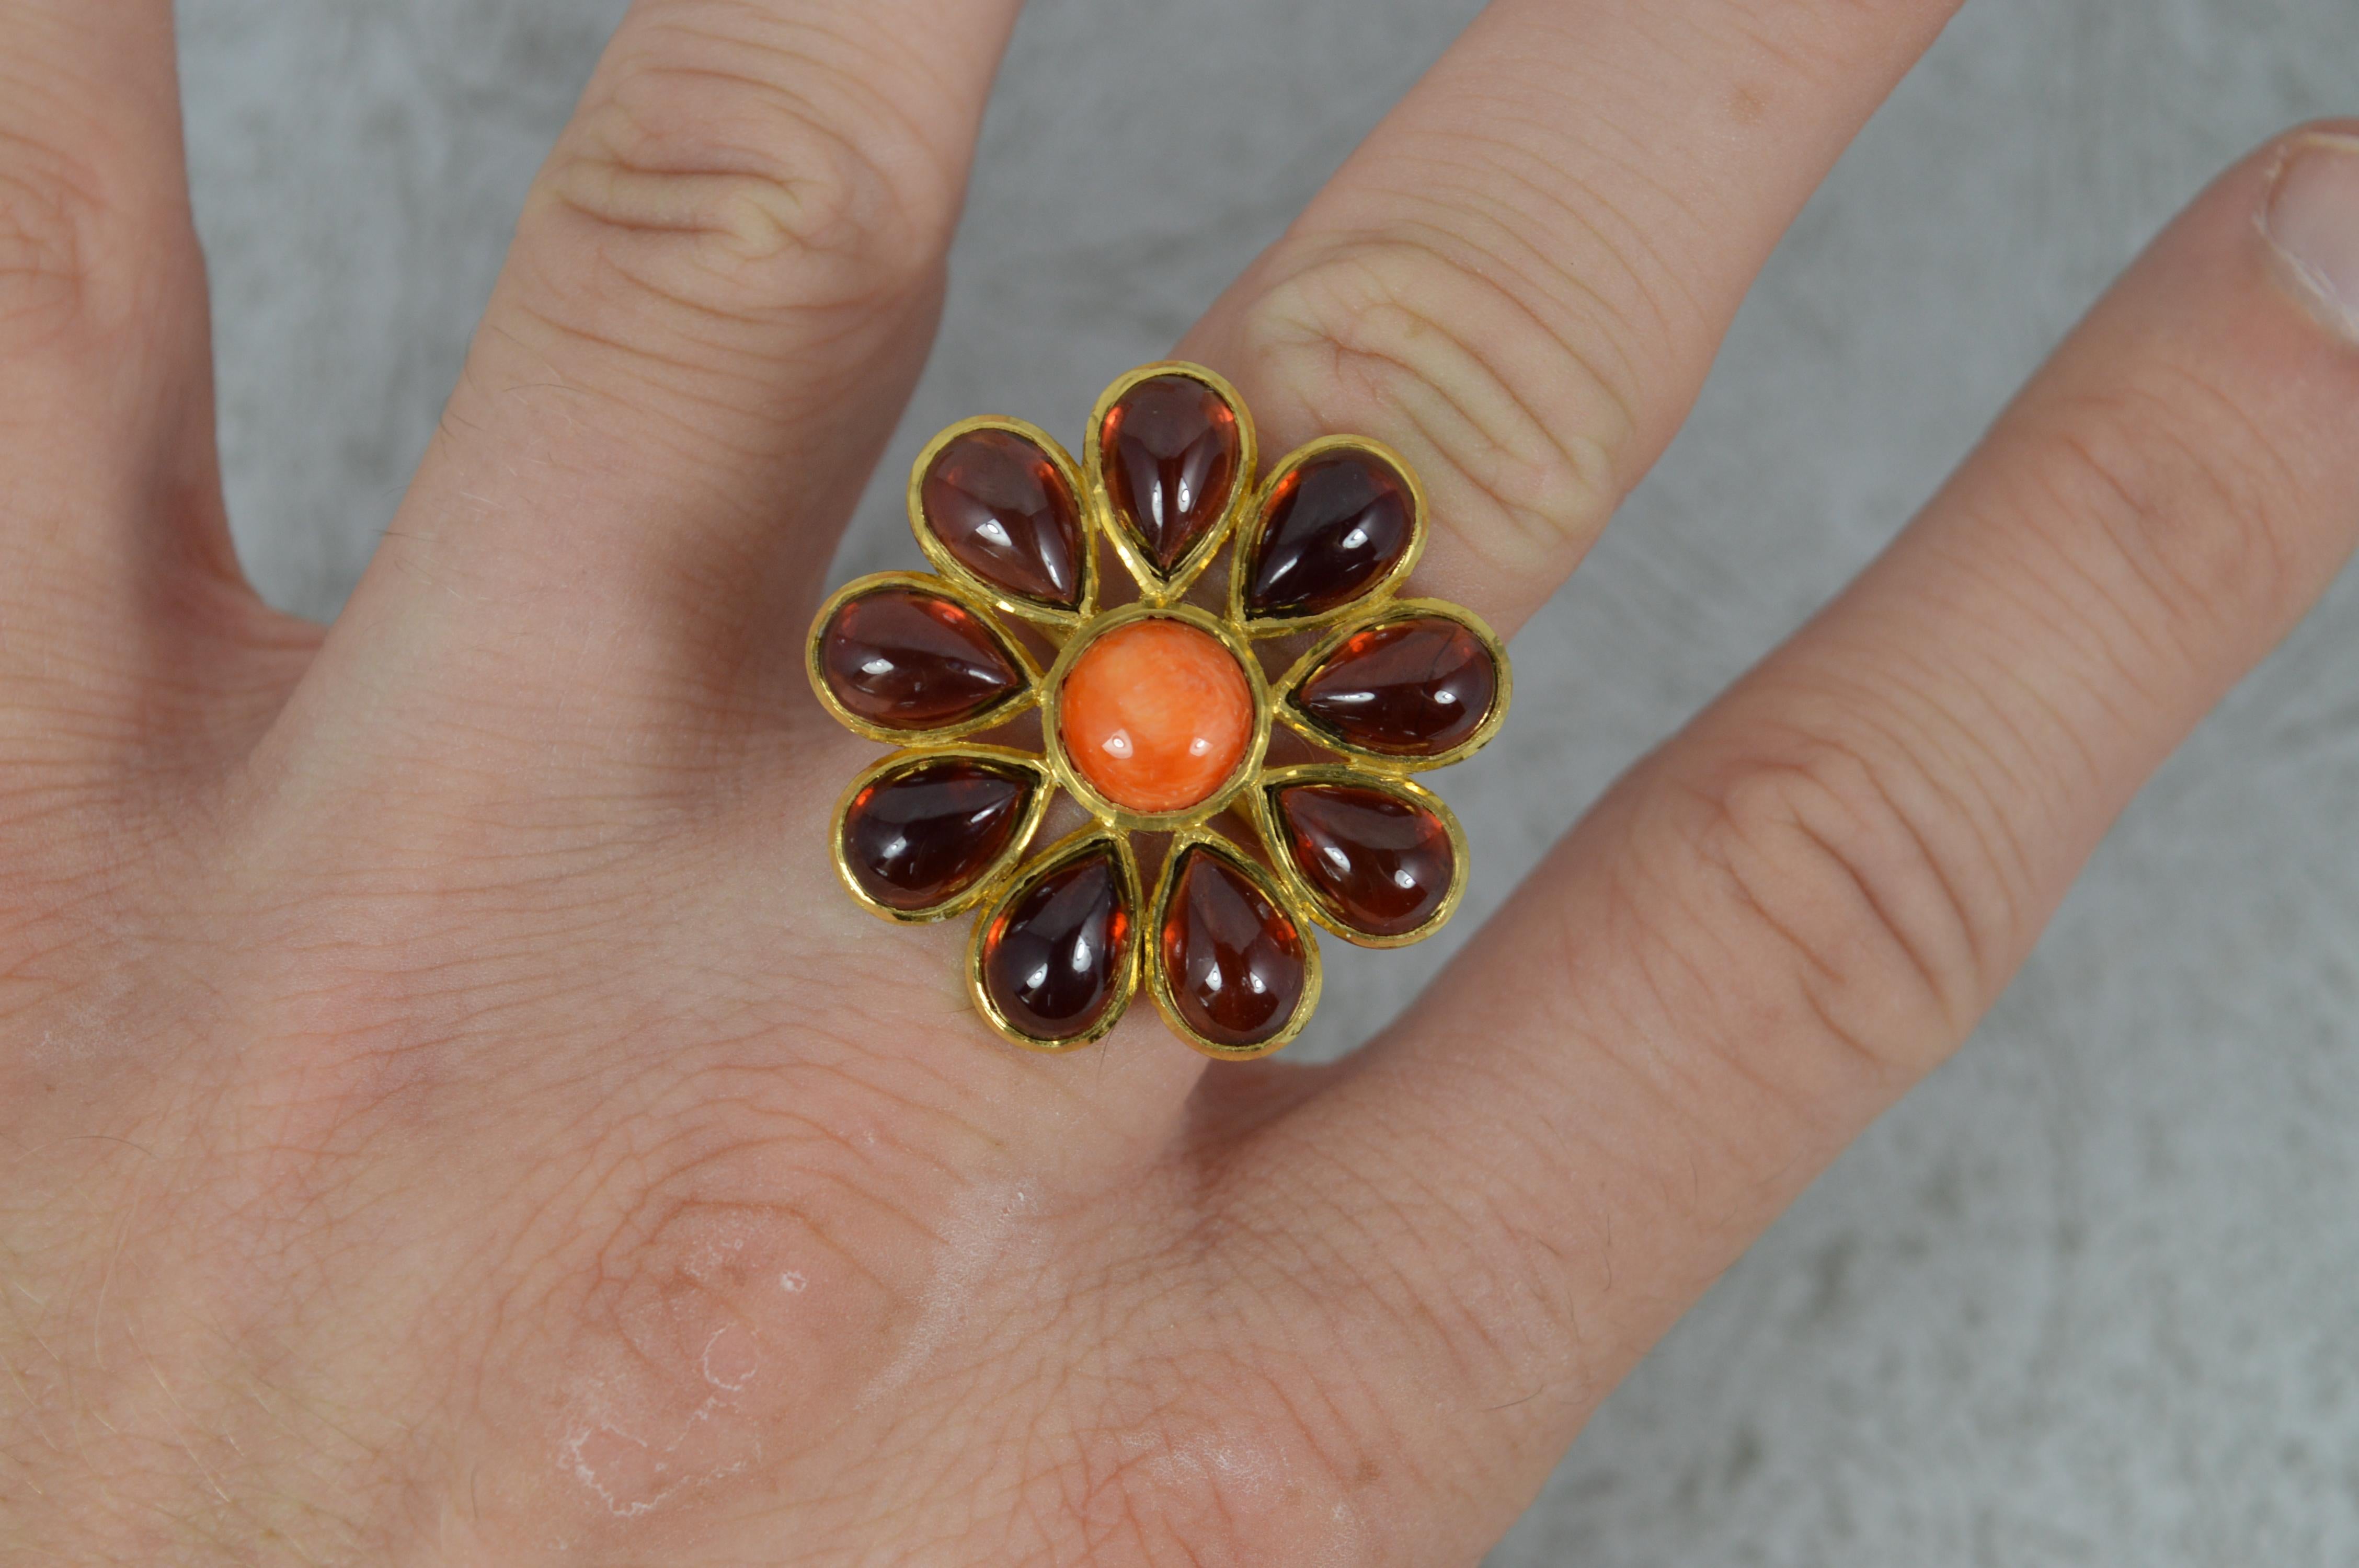 A beautiful statement ring.
Solid 22 carat yellow gold example.
Designed with a circular coral to centre, 8mm diameter. Surrounding are nine pear shaped garnet cabochon stones, each 6mm x 8mm.
Creating a statement cluster head of 29mm x 29mm and